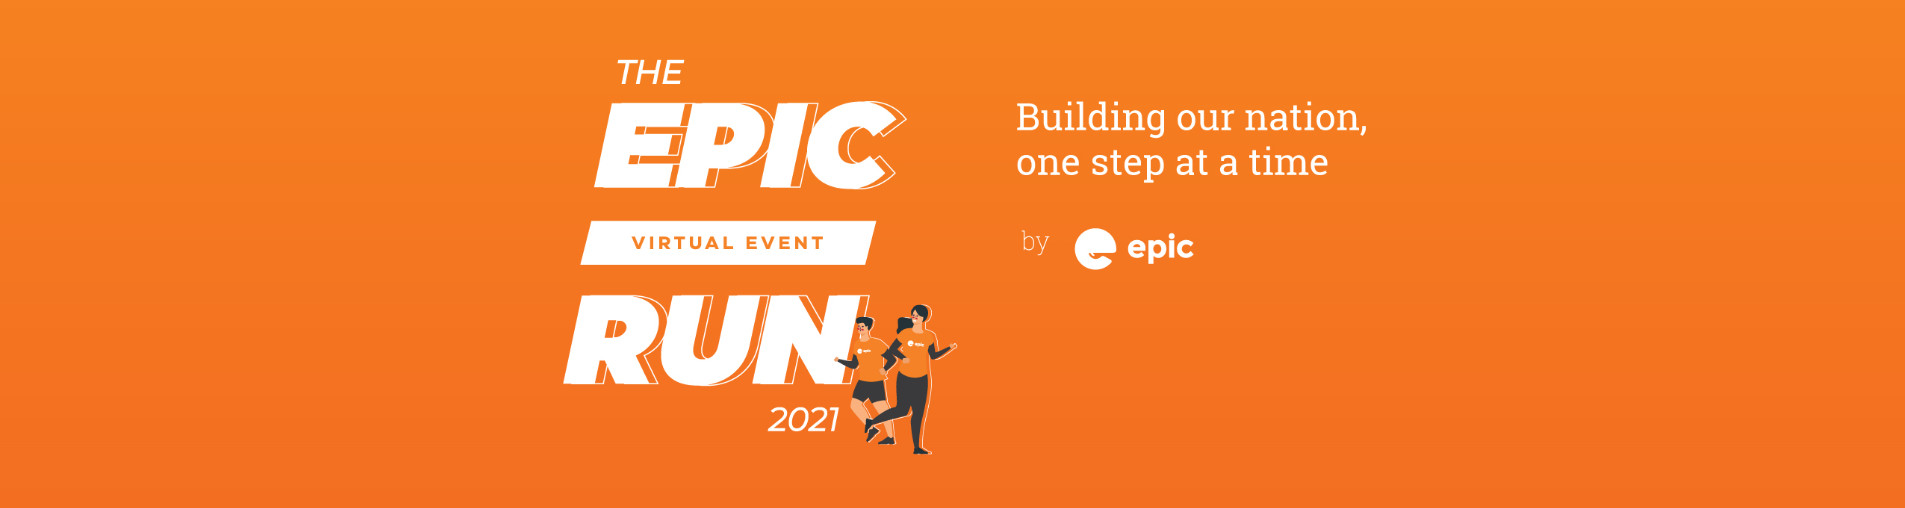 Running to be Epic, running to build homes